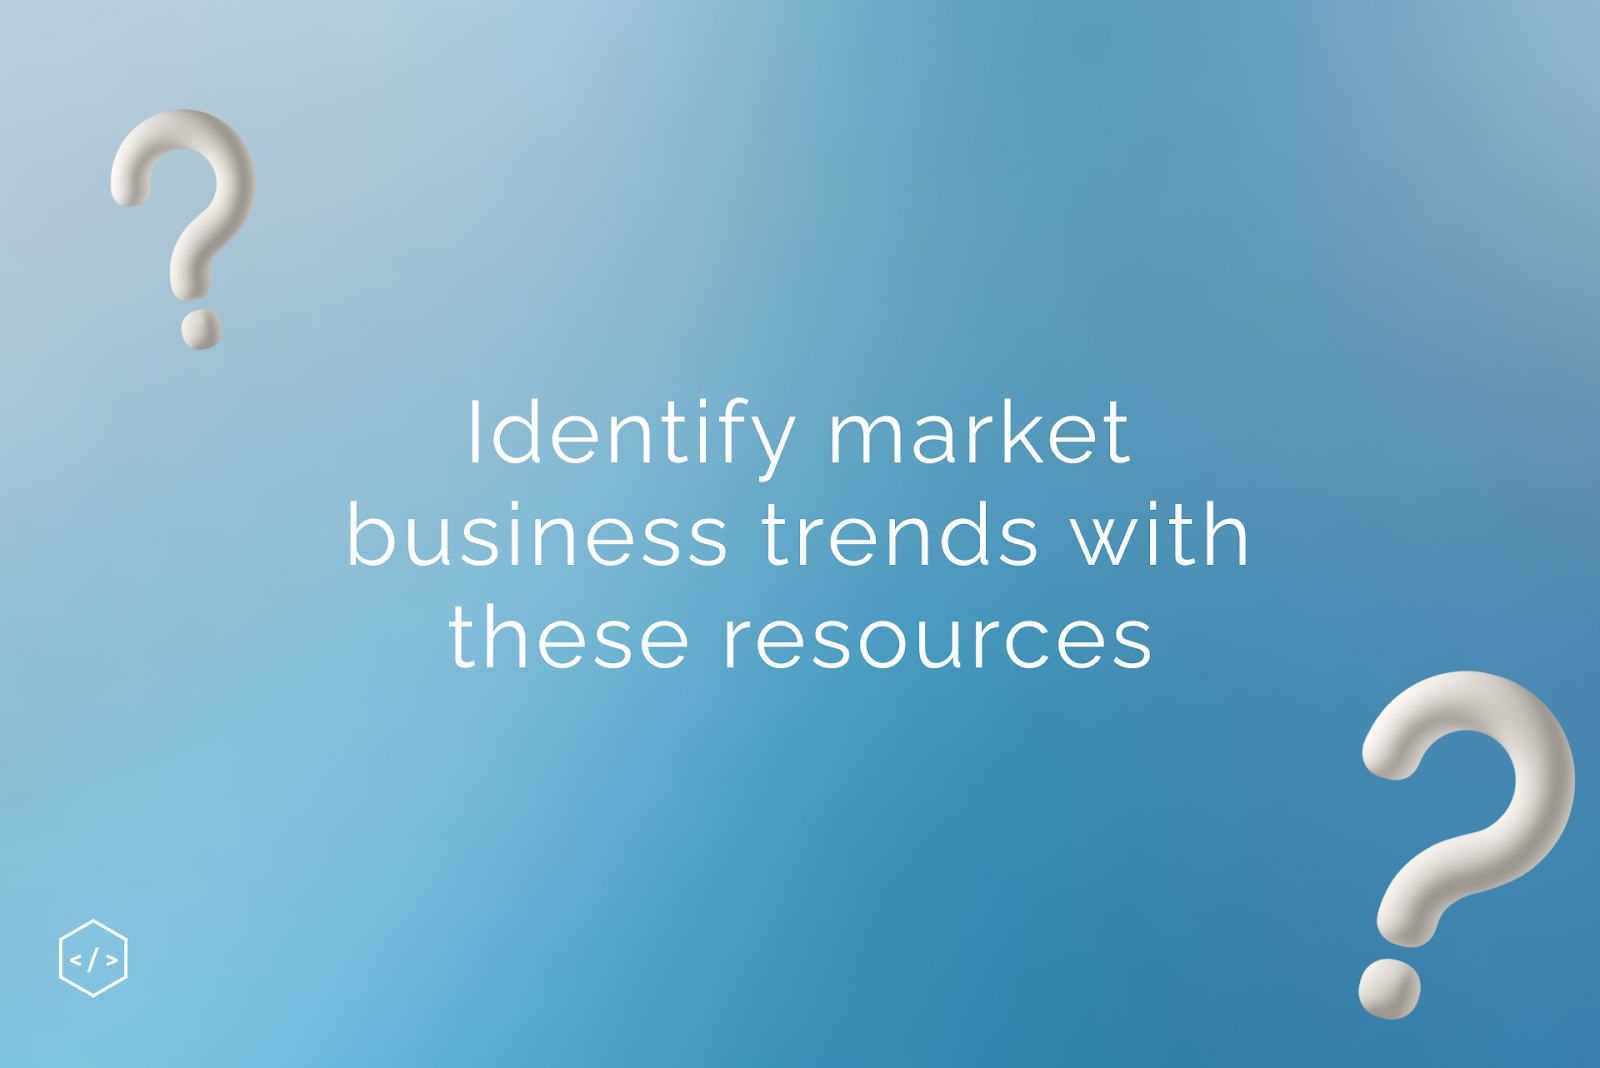 12 Resources for Identifying Market Business Trends